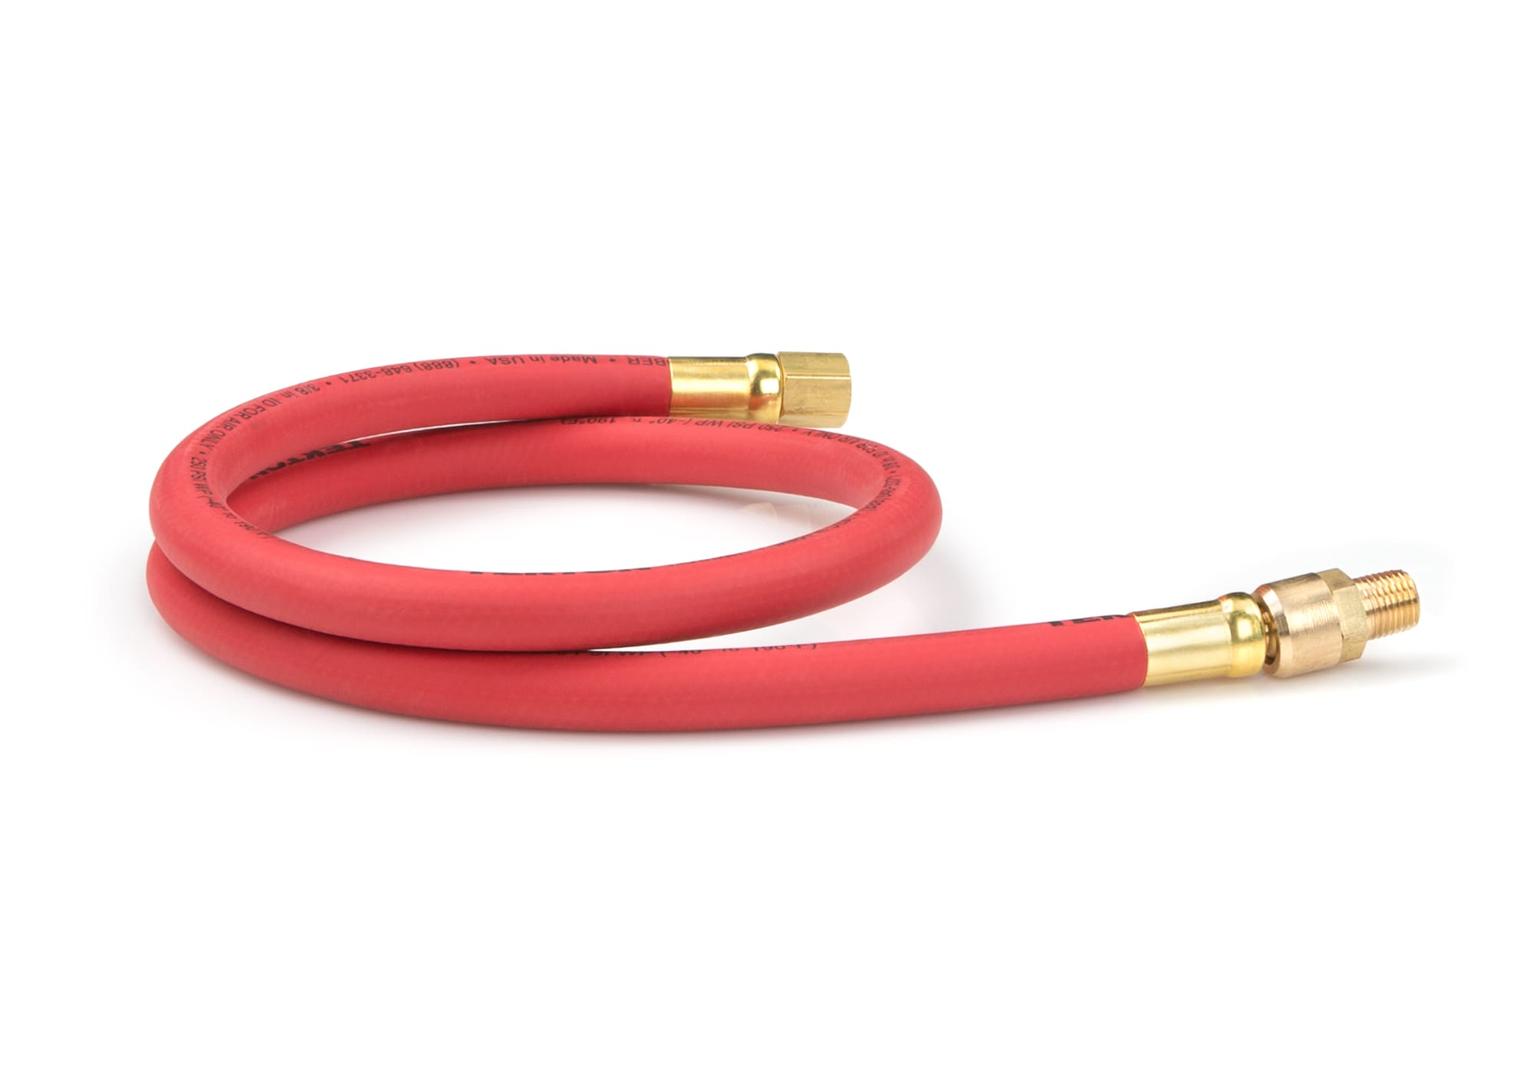 TEKTON 46347-S 3/8 Inch I.D. x 3 Foot Rubber Whip Hose with Swivel (250 PSI)